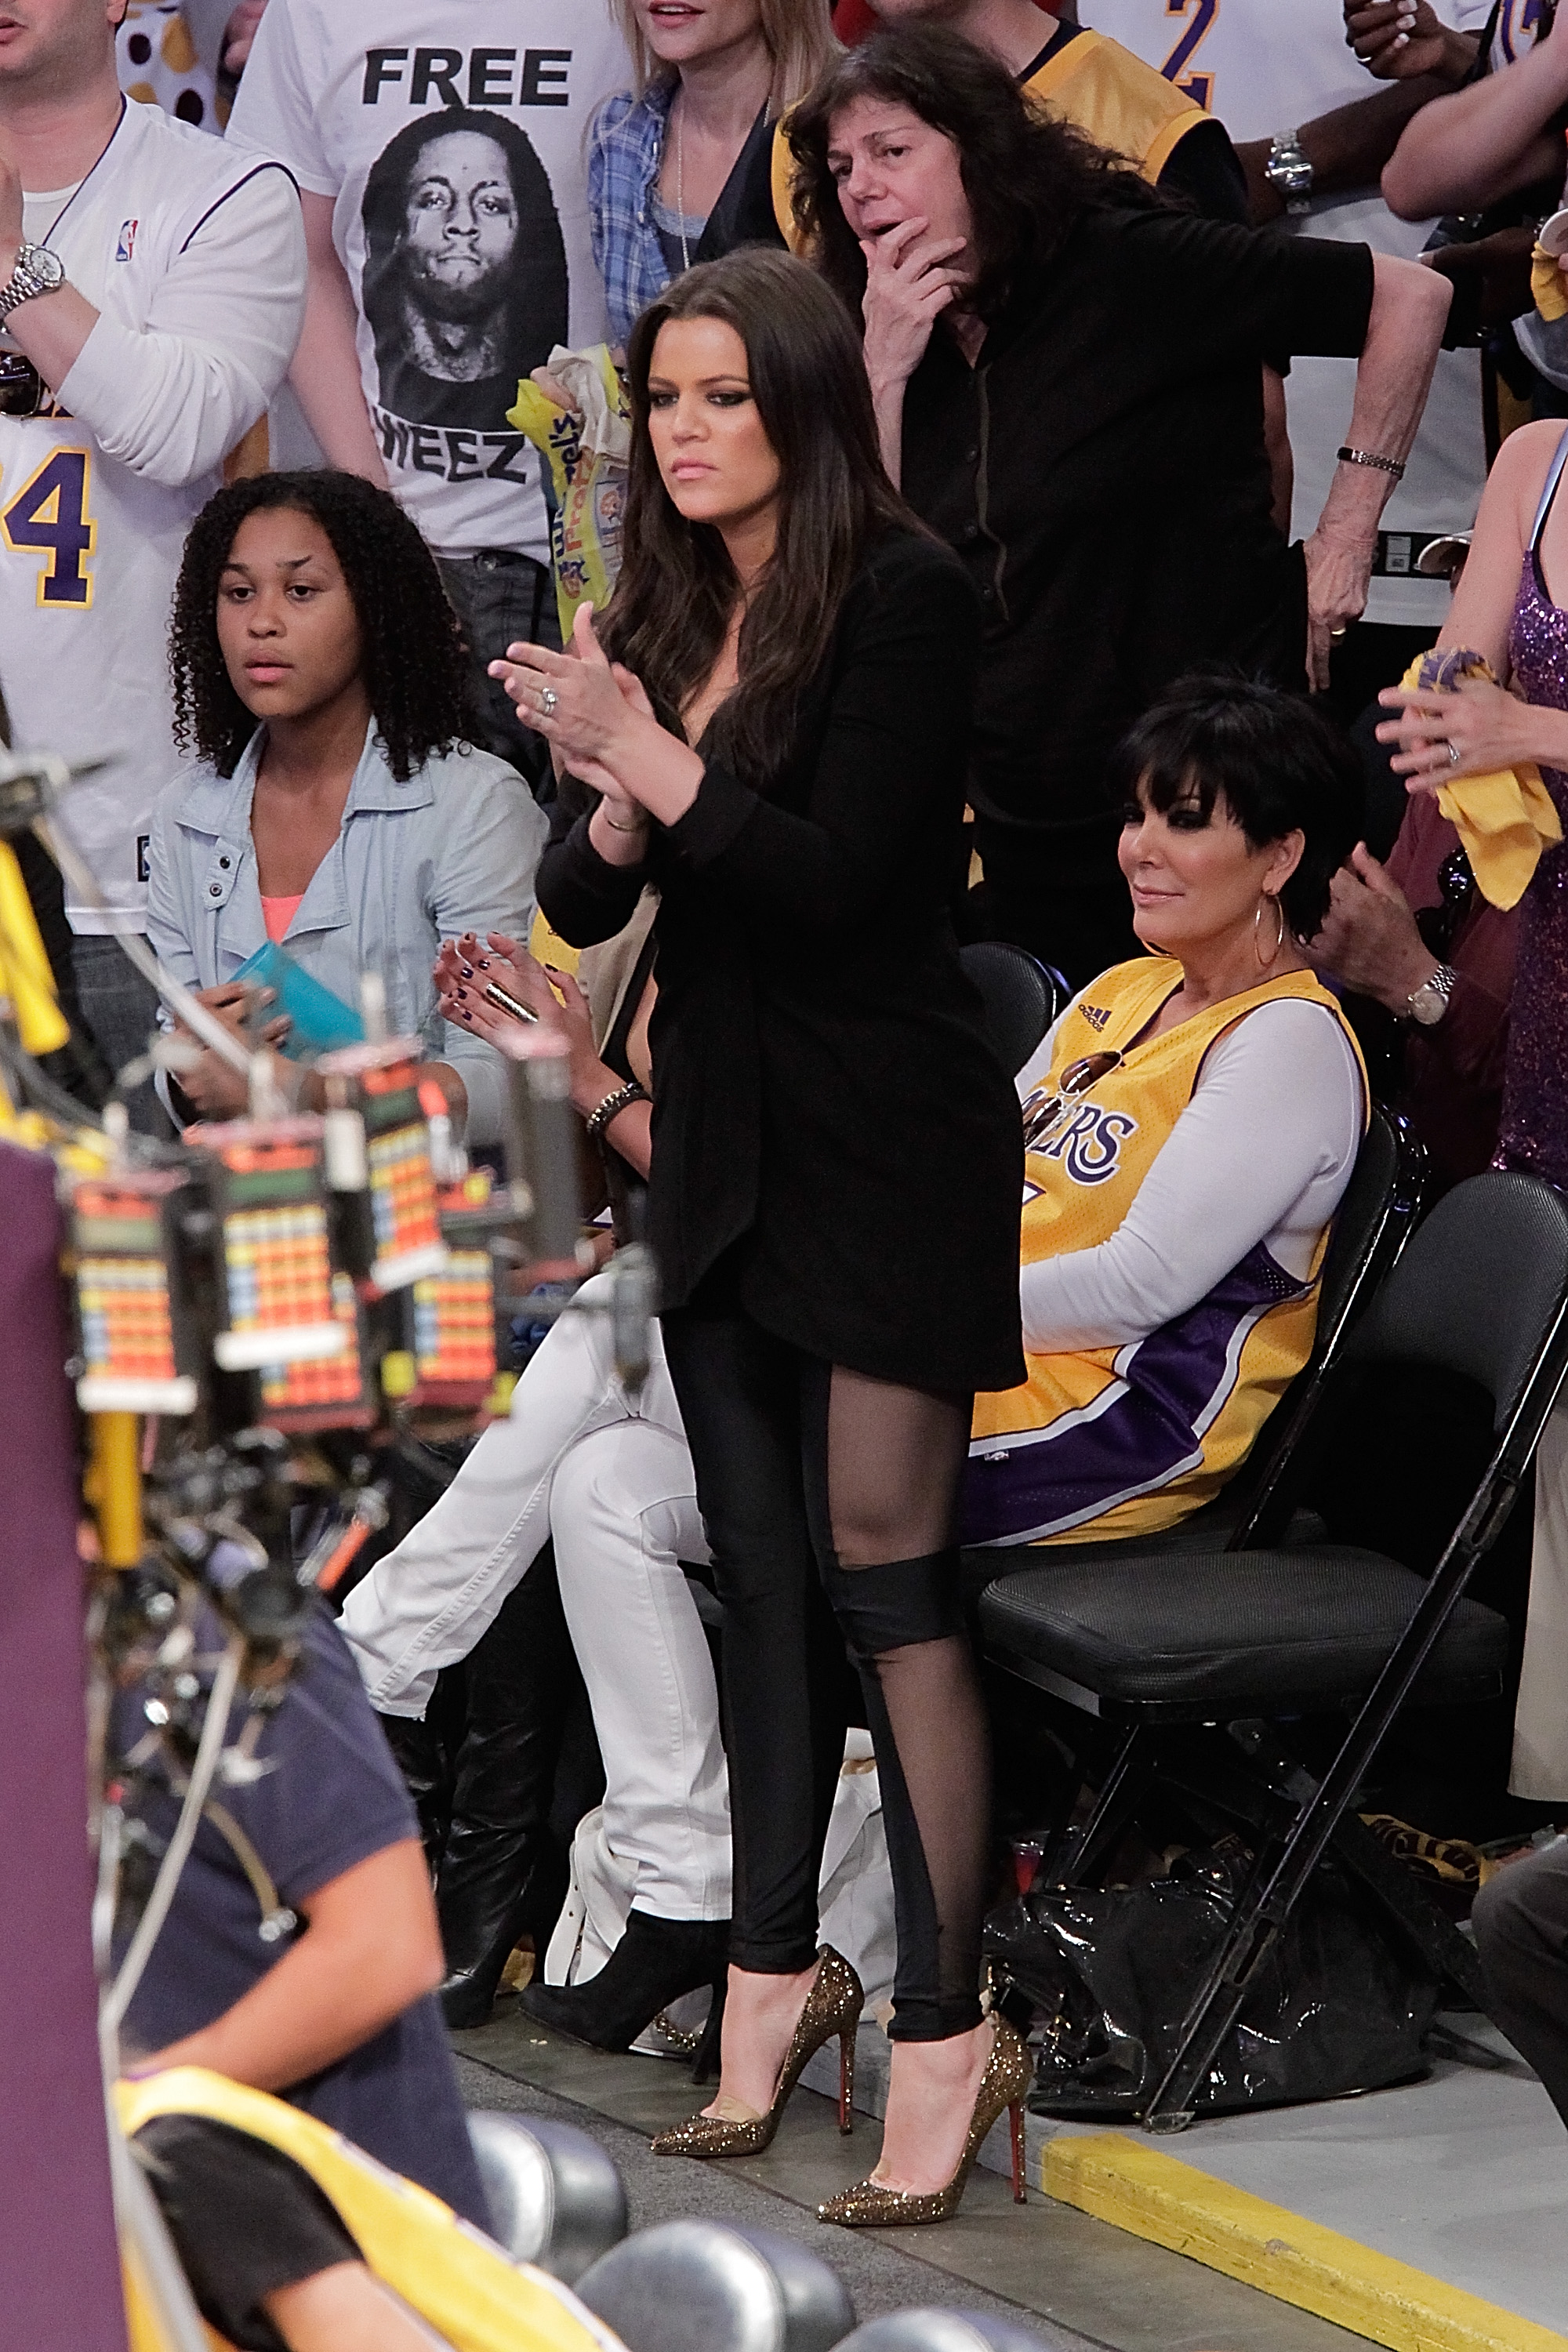 Destiny Odom (L), Khloe Kardashian (C) and Kris Jenner (R) attend Game Seven of the NBA playoff finals between the Boston Celtics and the Los Angeles Lakers during the 2010 NBA Playoff at Staples Center, on June 17, 2010, in Los Angeles, California.| Source: Getty Images